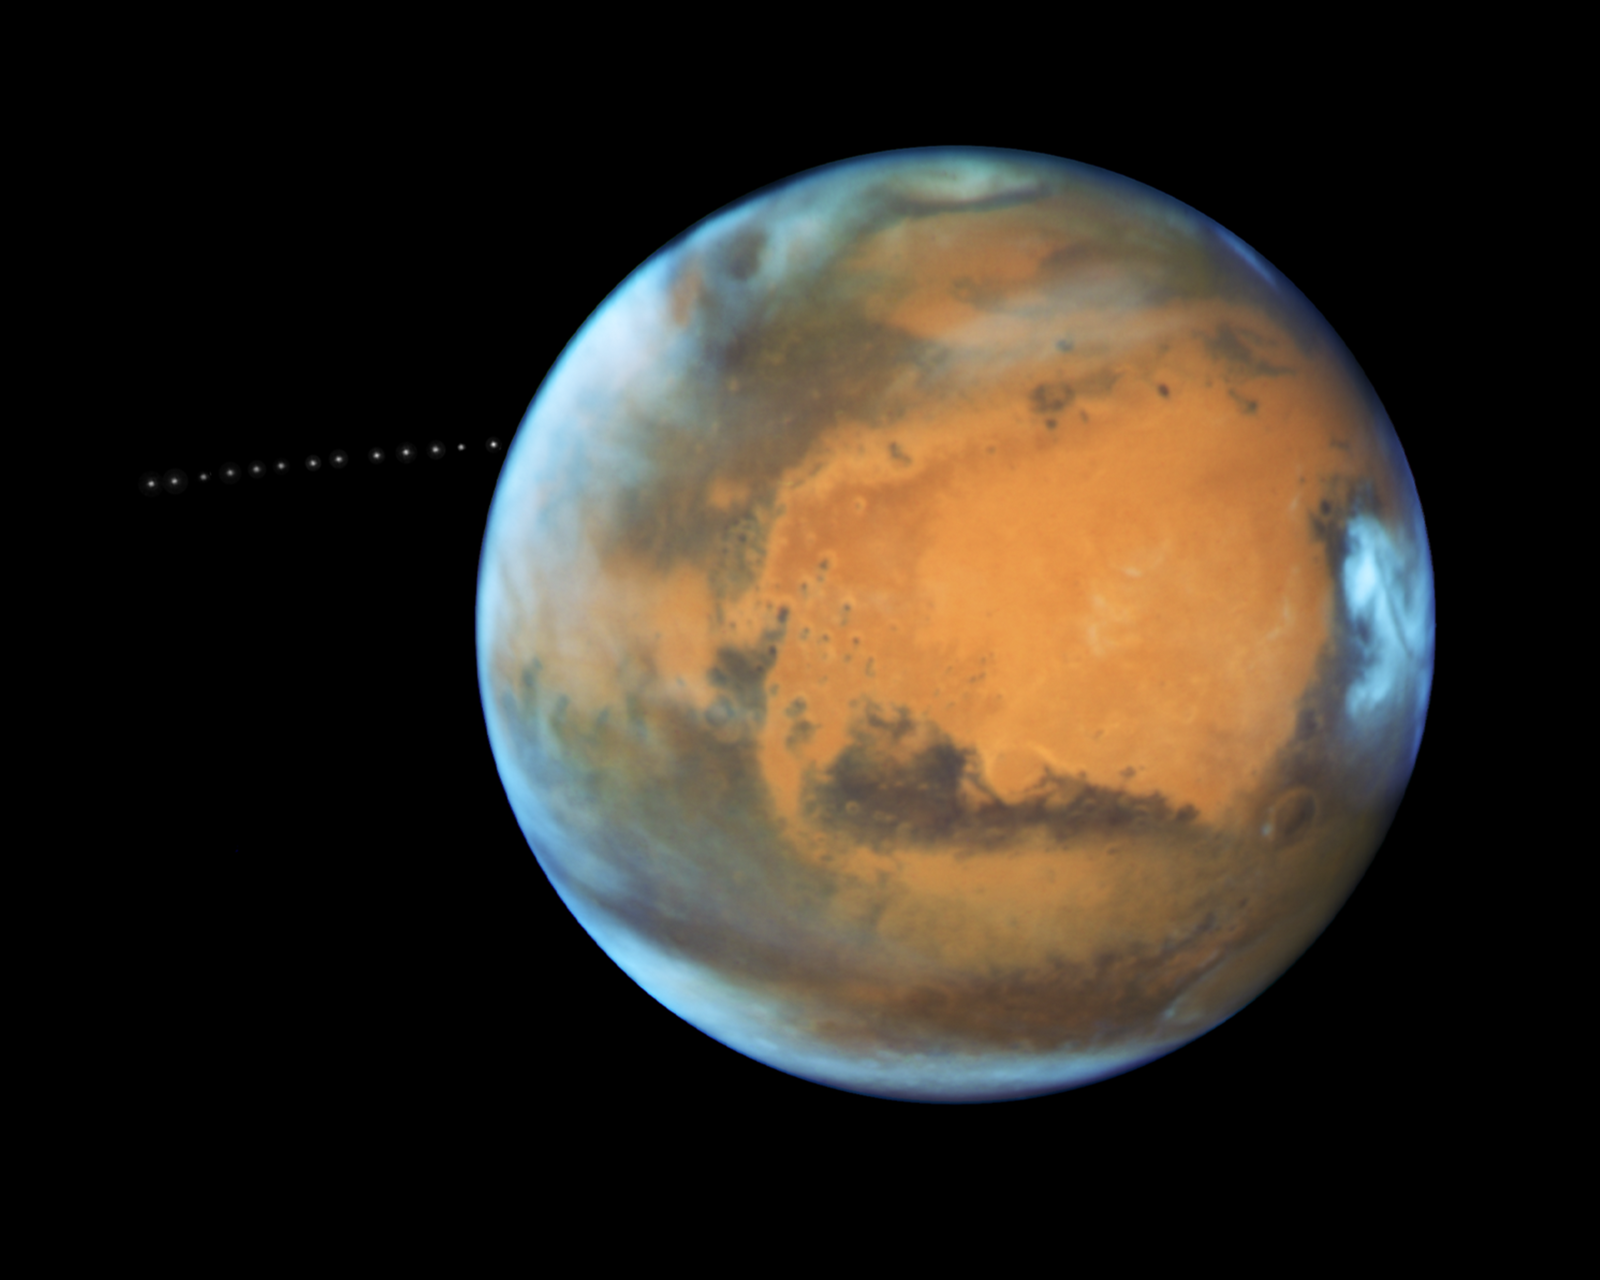 While photographing Mars, NASA's Hubble Space Telescope captured a cameo appearance of the tiny moon Phobos on its trek around the Red Planet.